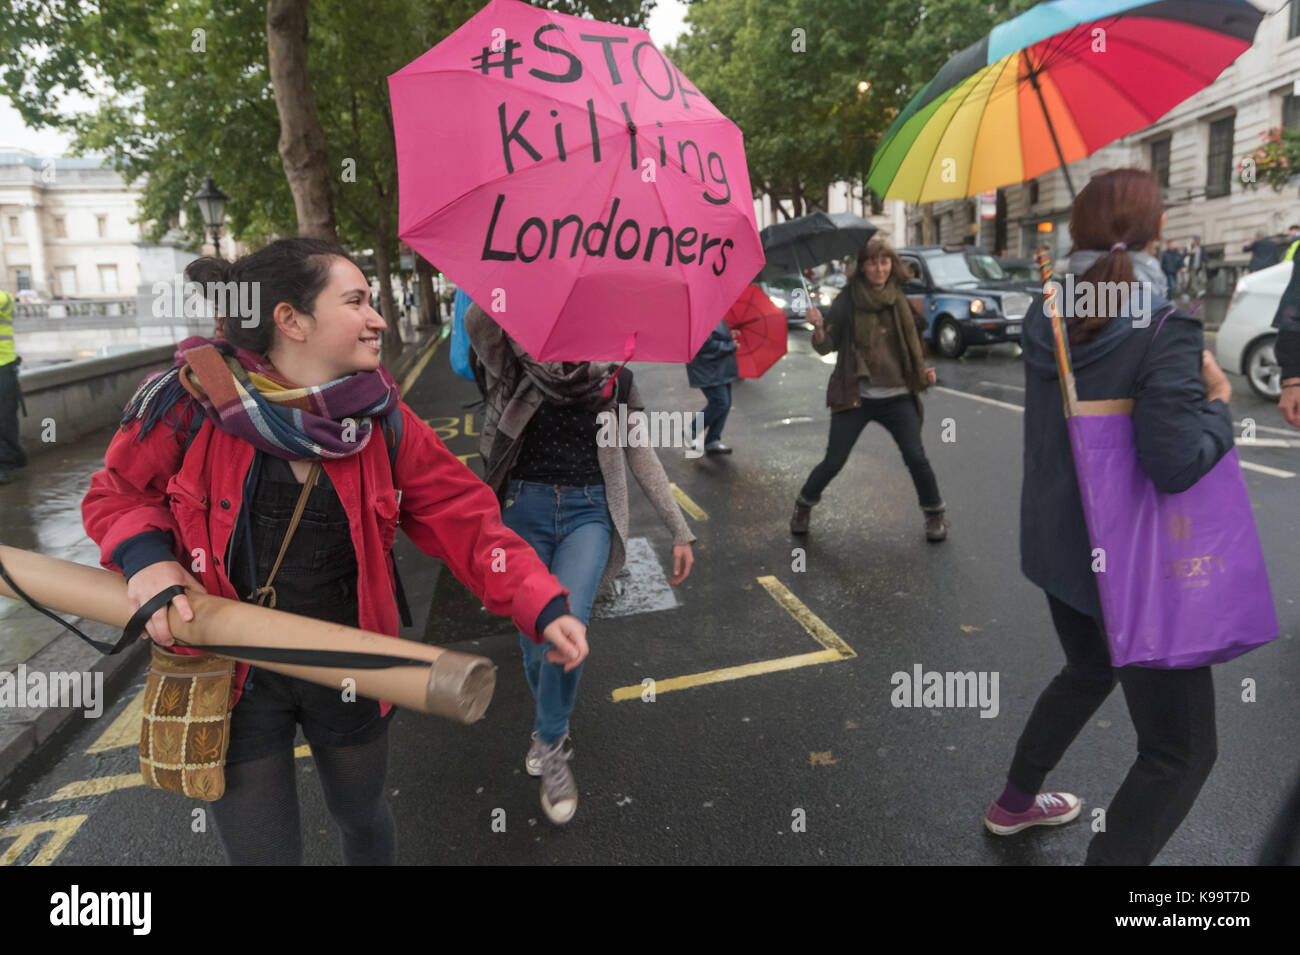 September 21, 2017 - London, UK - London, UK. 21st September 2017. After successfully blocking all traffic in Trafalgar Square for a short protest and a few minutes rest, 'Stop Killing Londoners' block the east side of the square for a few minutes of disco protest, dancing to loud music on the roadway. Eventually police came and told them to leave and the protest ended. This was the 5th protest by campaigners from Rising Up aimed at mobilising people across London to demand action from the Mayor and TfL who are failing to confront this pressing problem. Boris laughed at the problem and Sadiq K Stock Photo